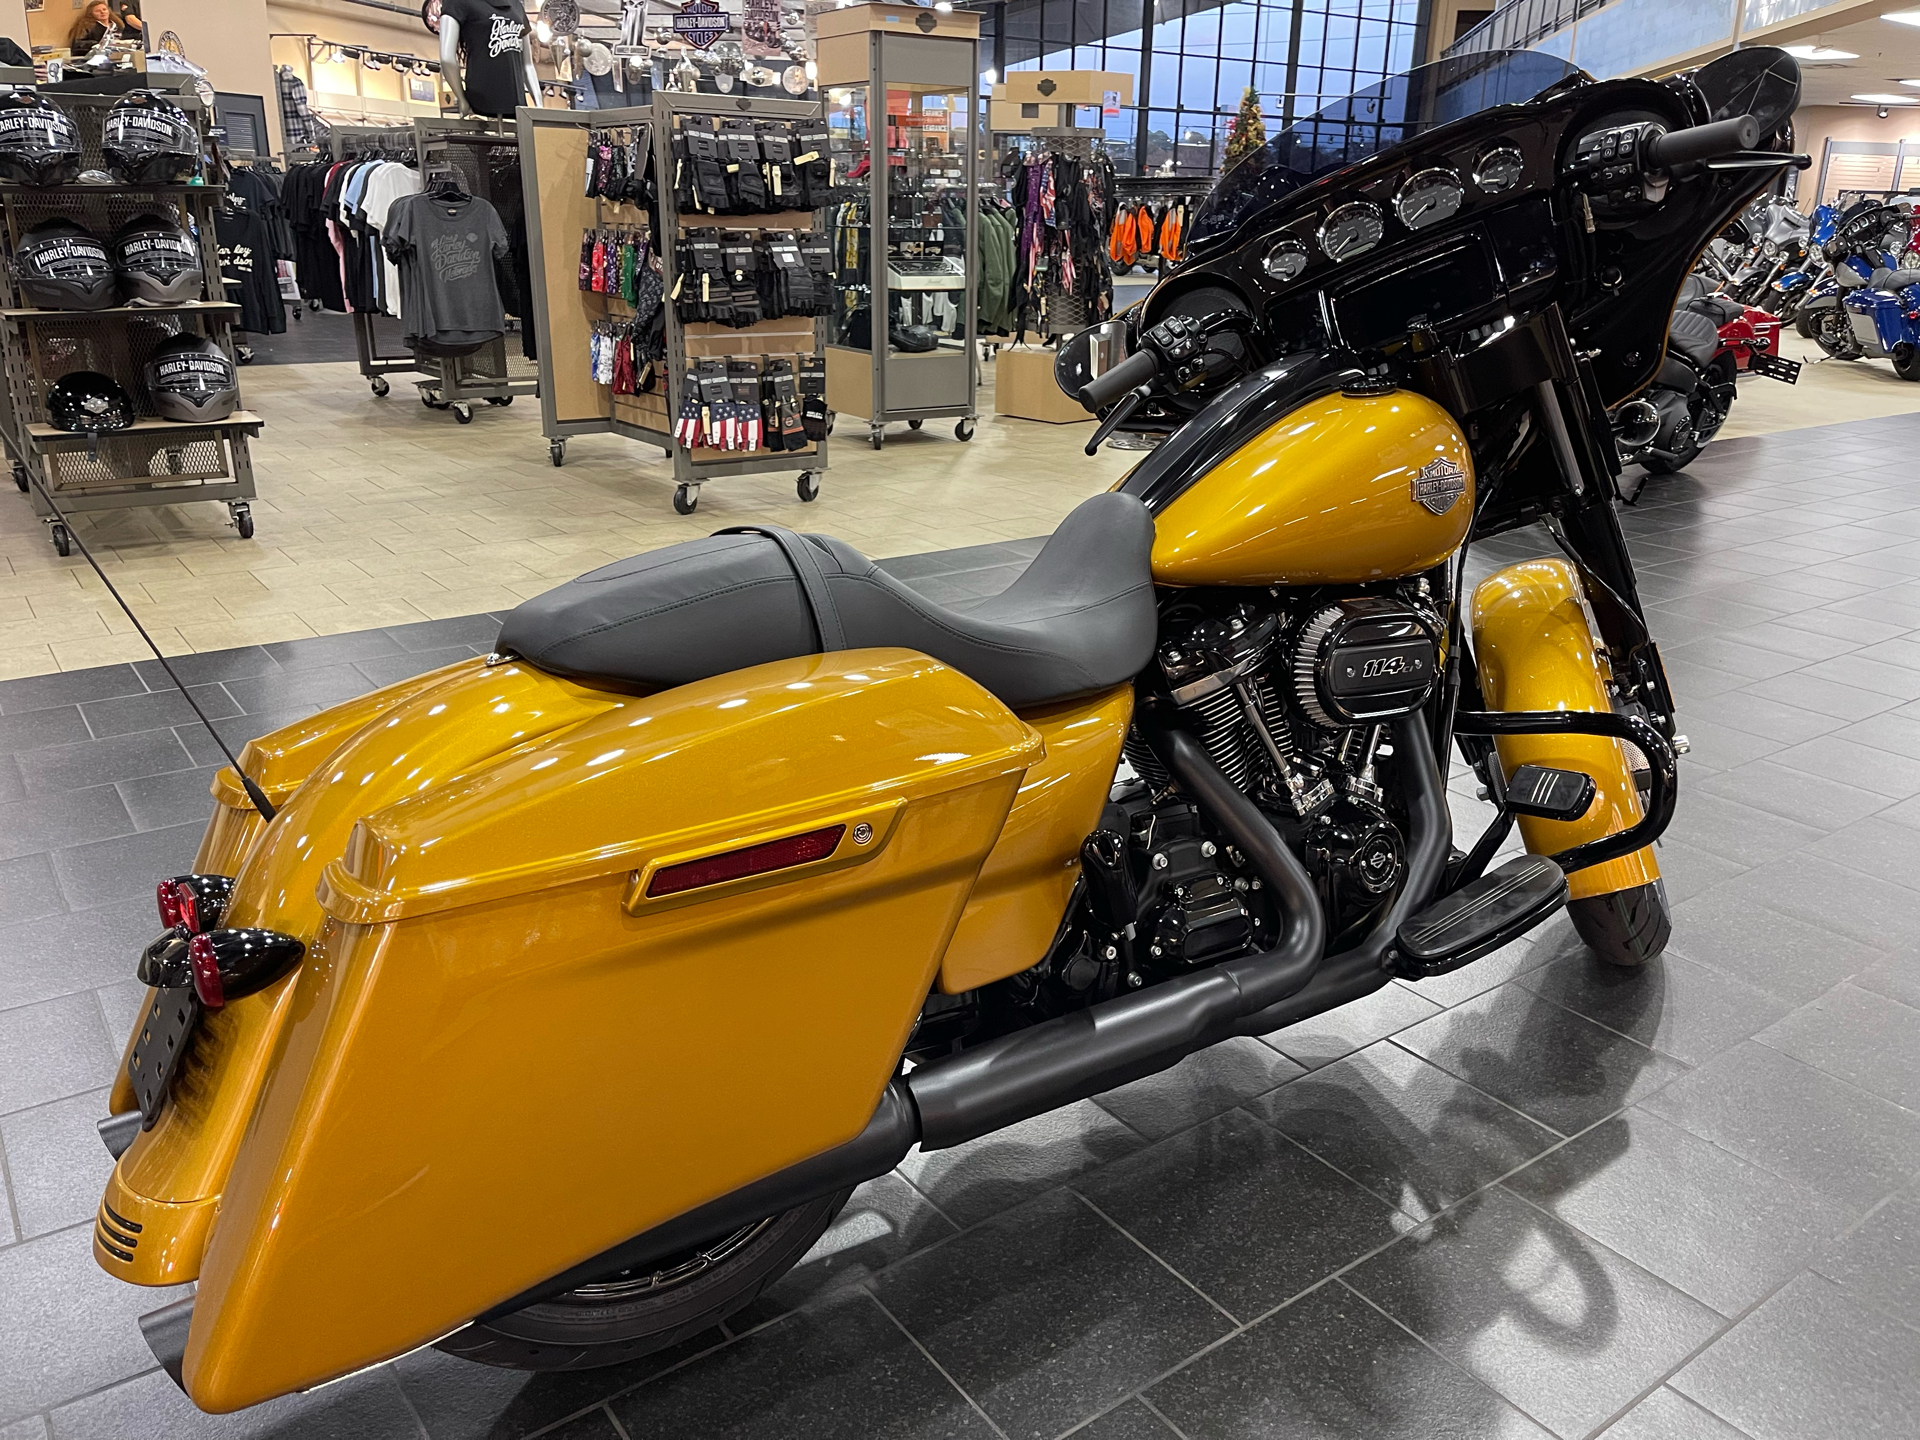 2023 Harley-Davidson Street Glide® Special in The Woodlands, Texas - Photo 6